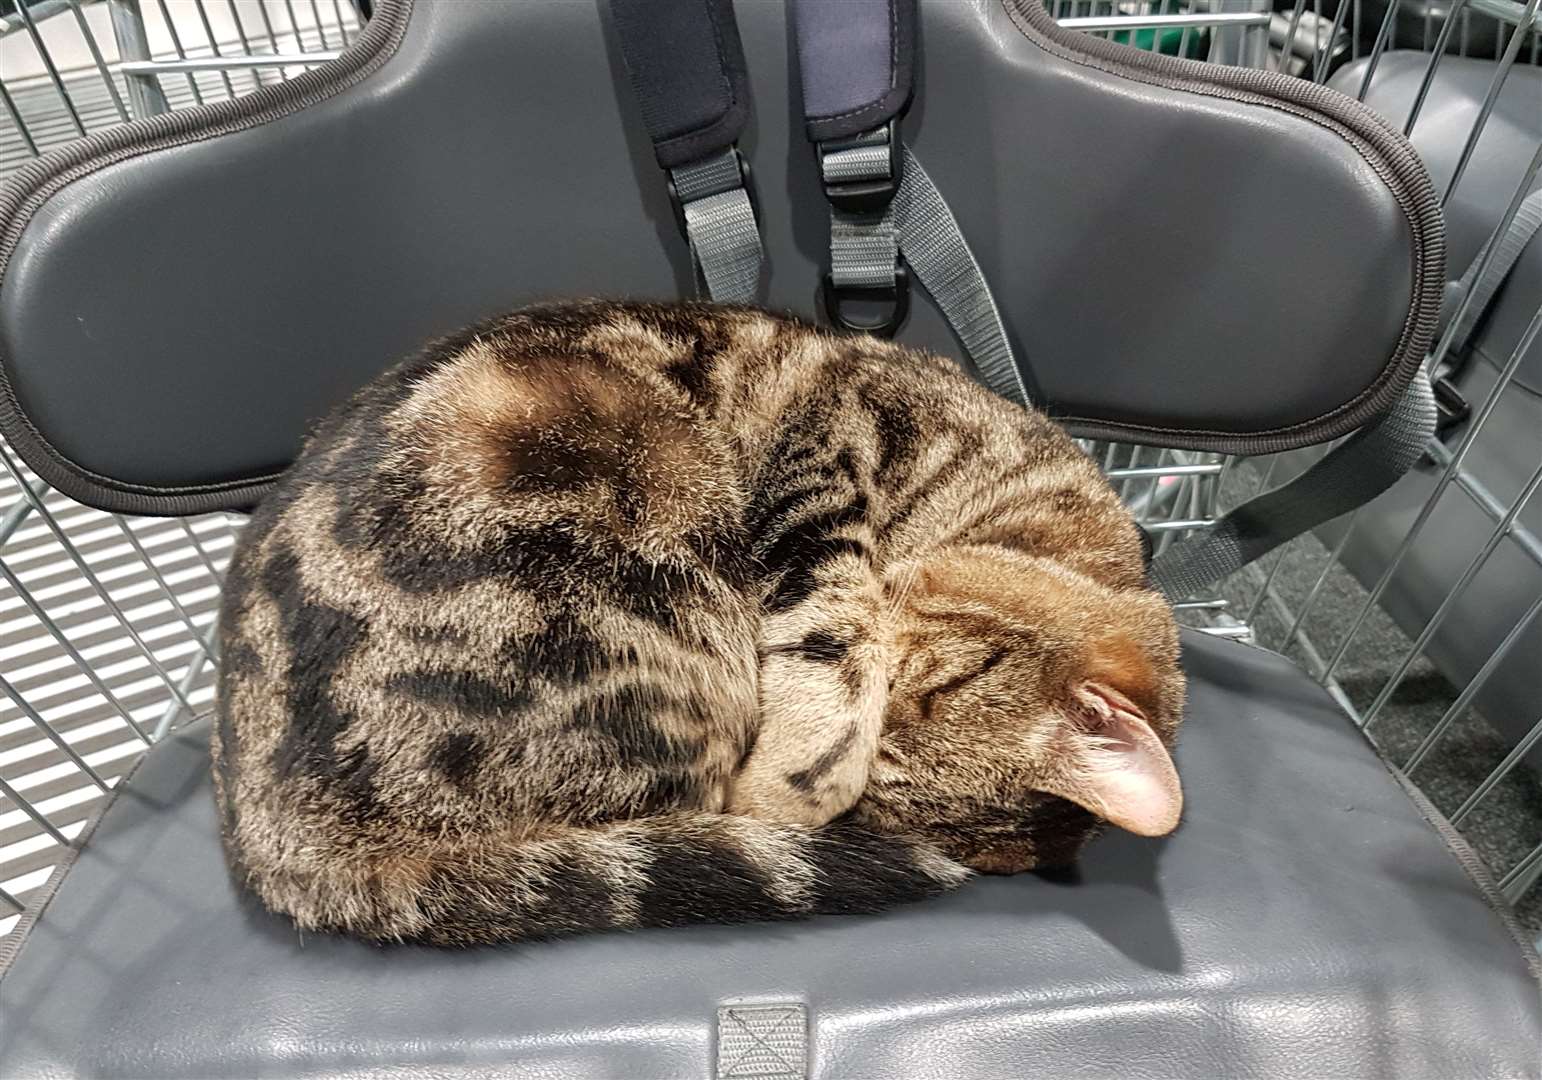 Tyson likes to lounge in the entrance of Ashford's Asda